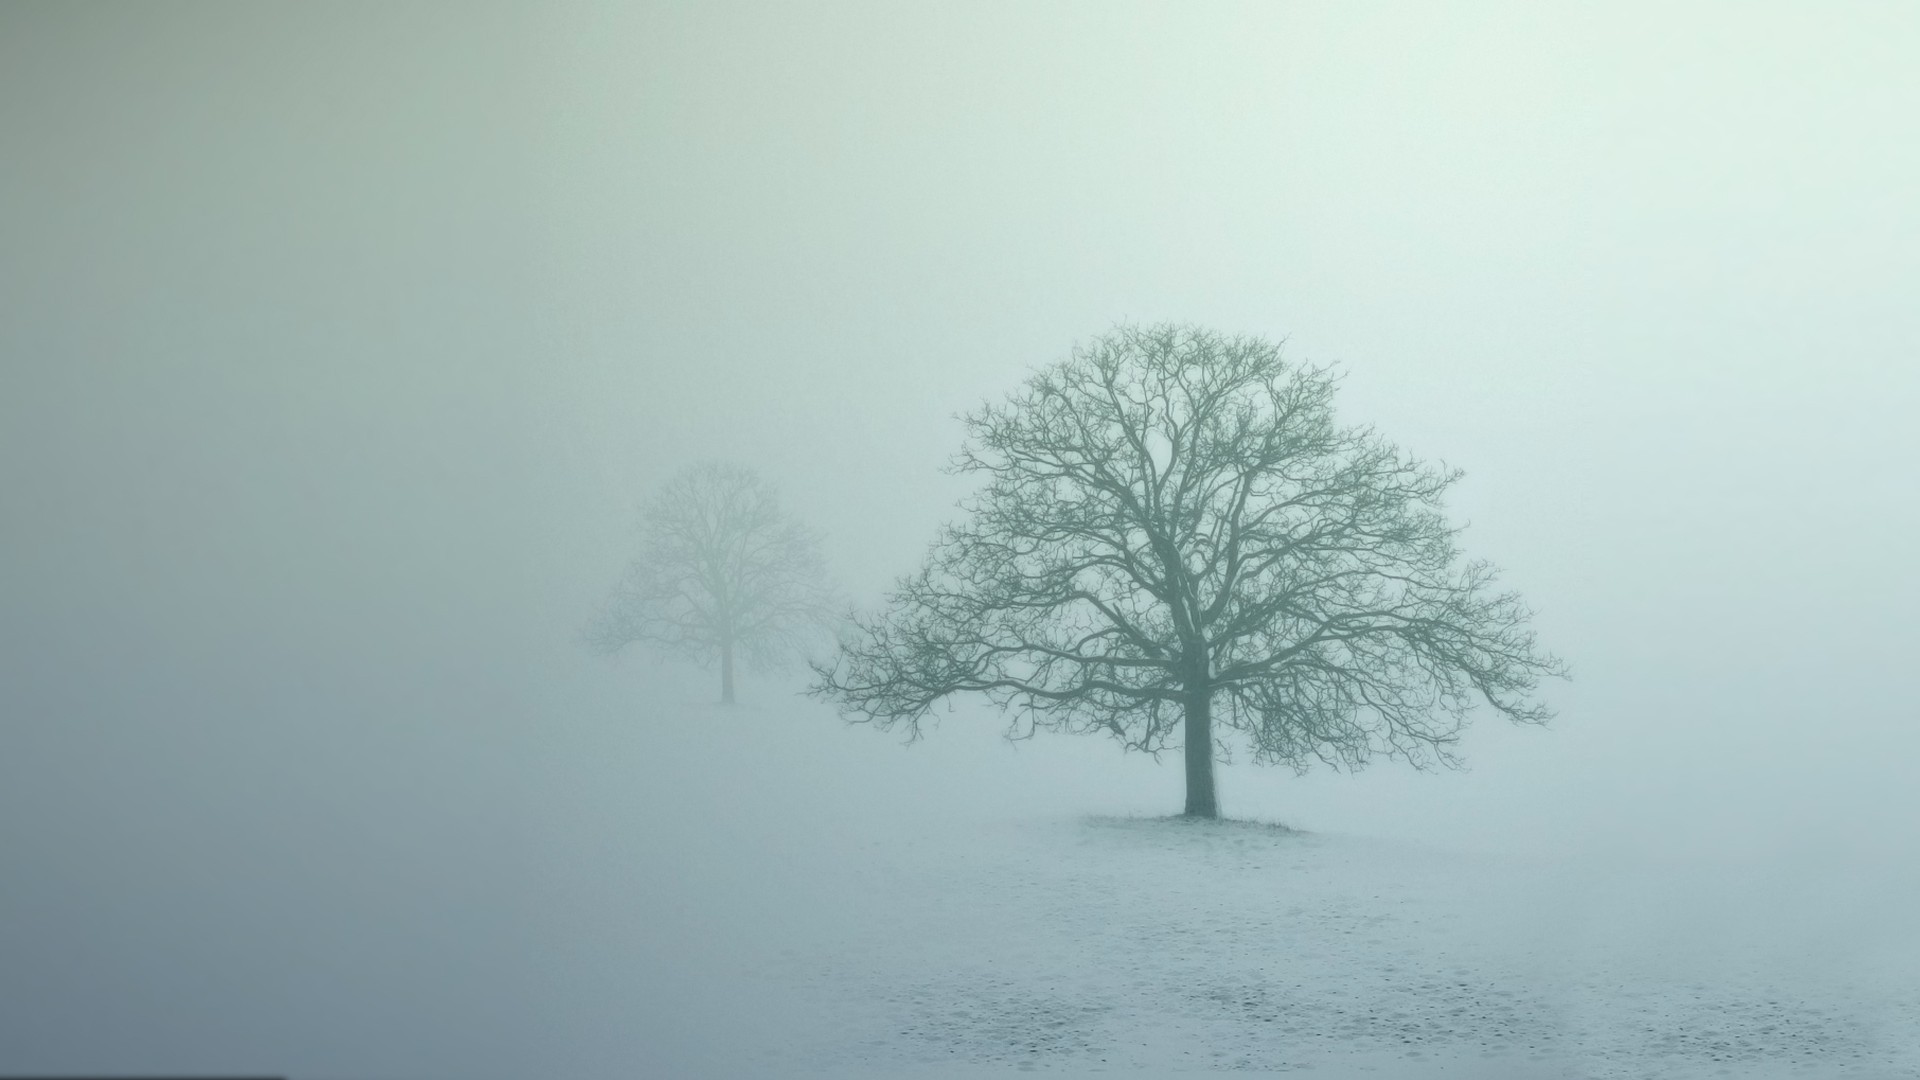 General 1920x1080 mist photography nature landscape snow winter outdoors ice cold